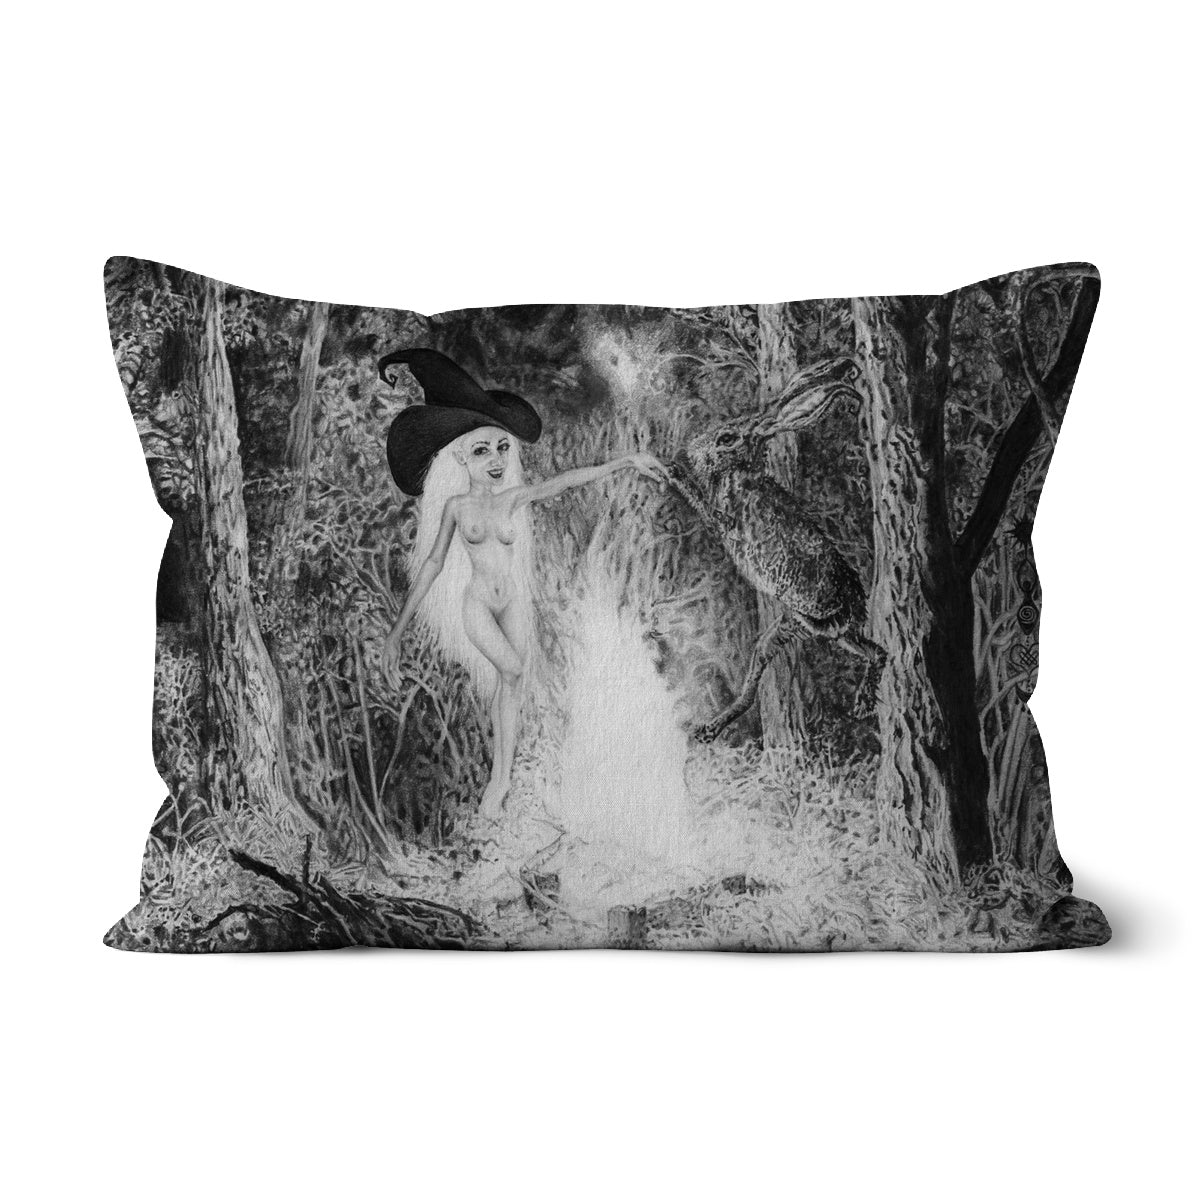 'Forever Forest'  Cushion